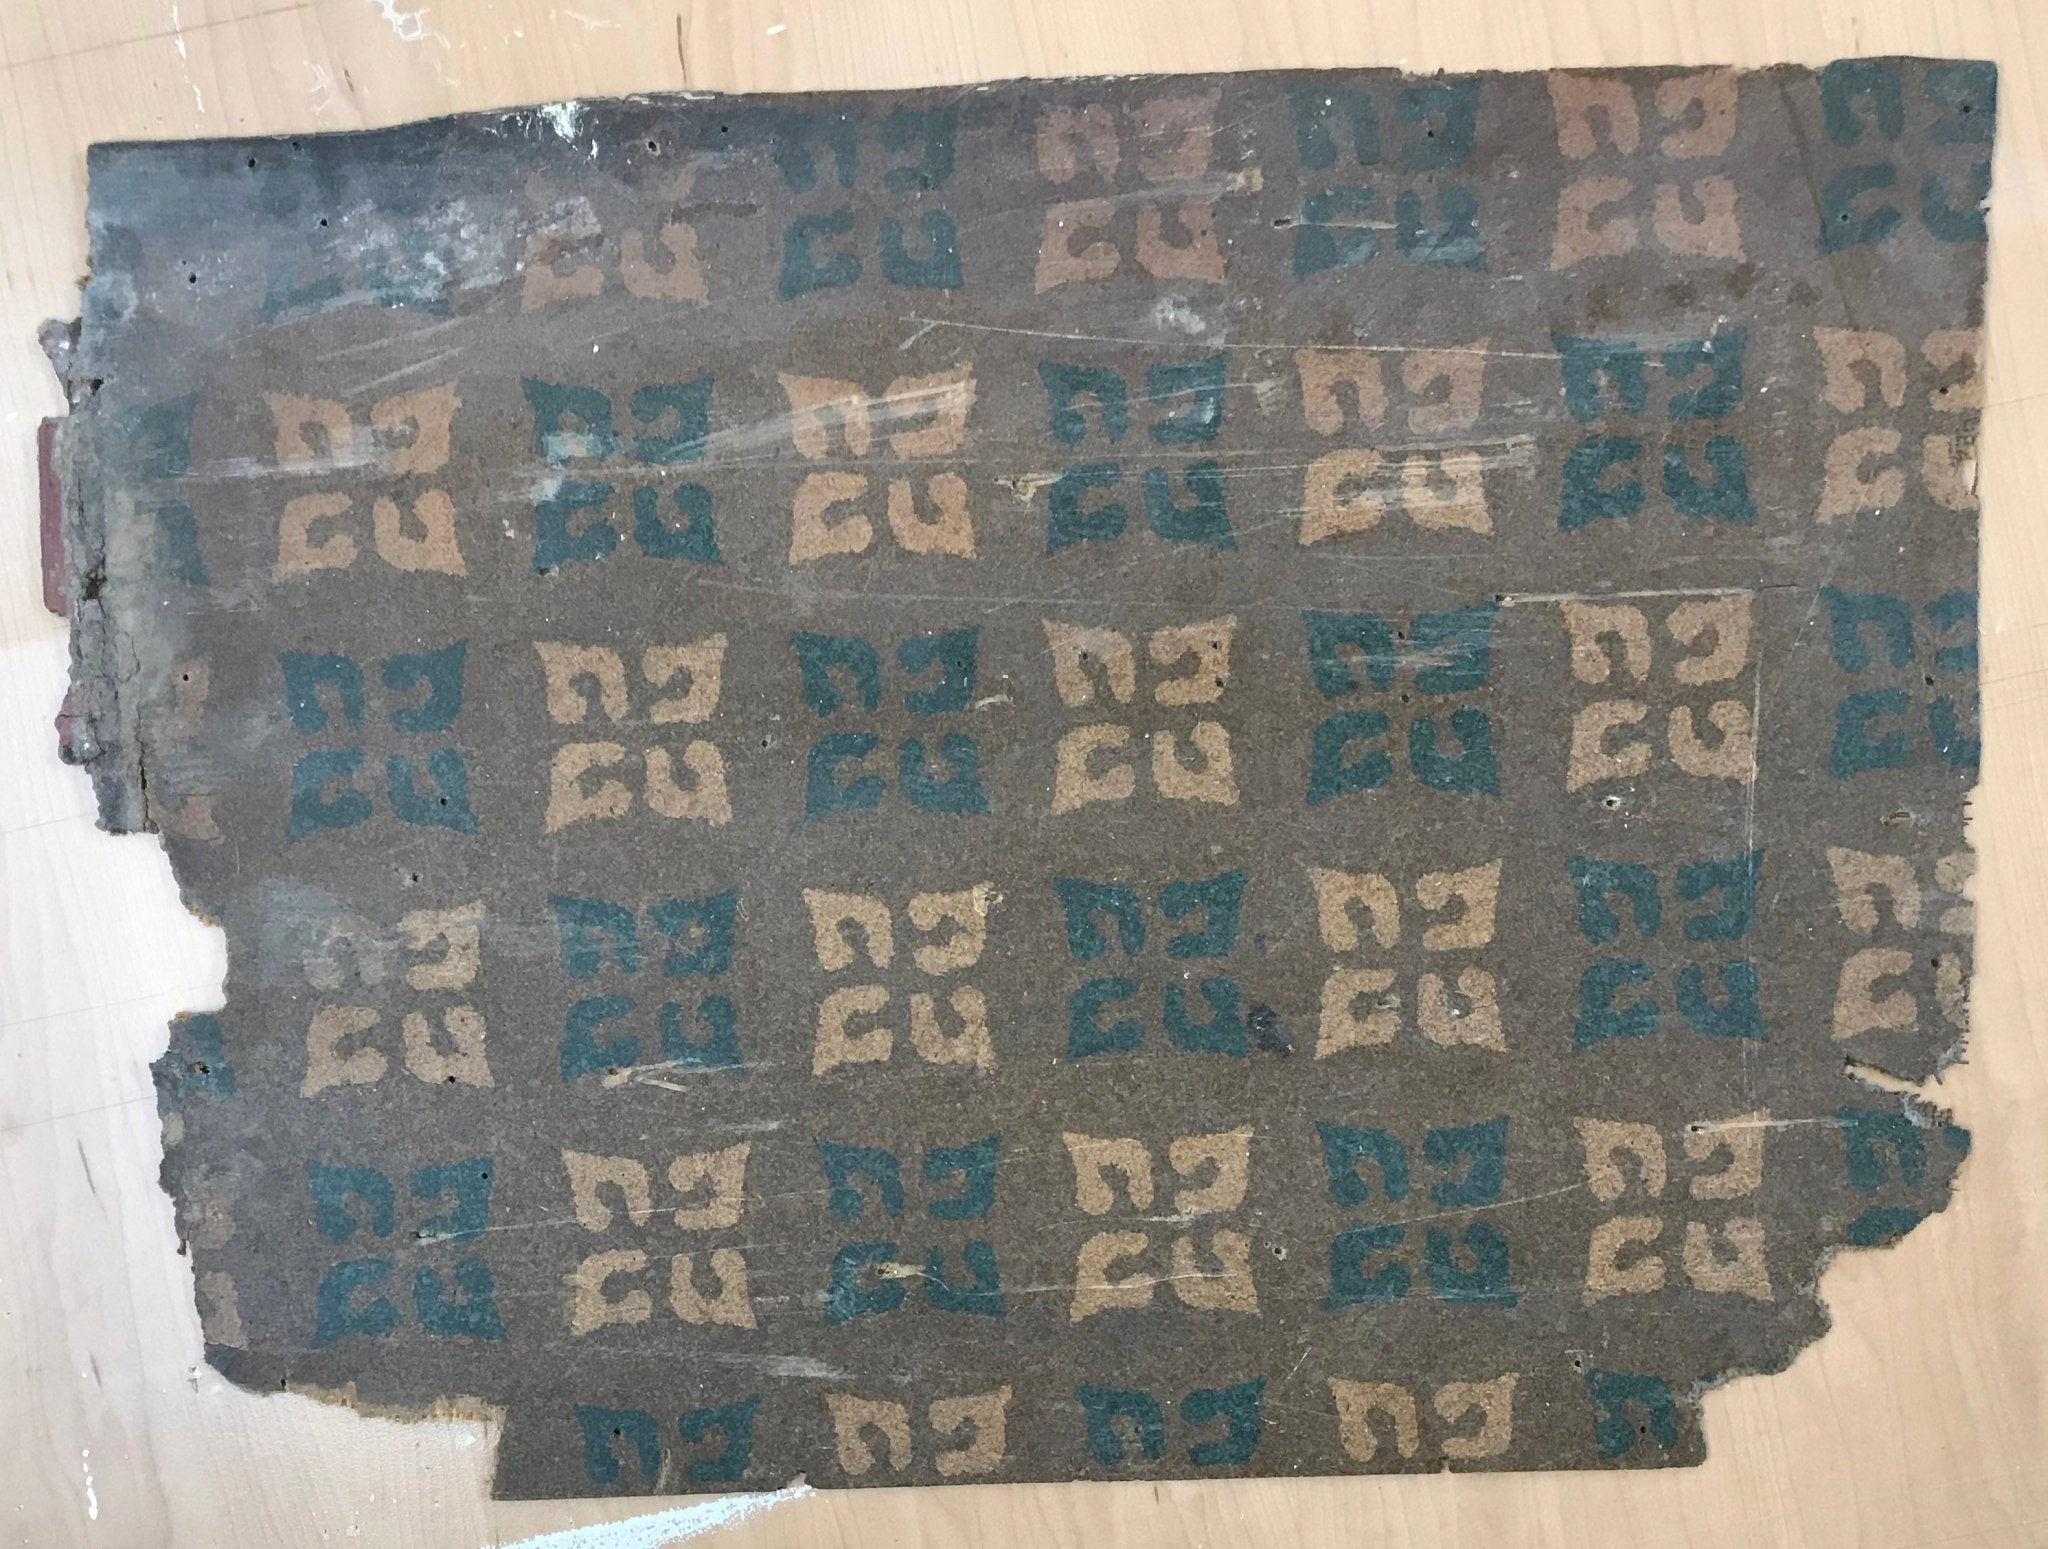 This is the linoleum scrap from which this floorcloth pattern was derived.